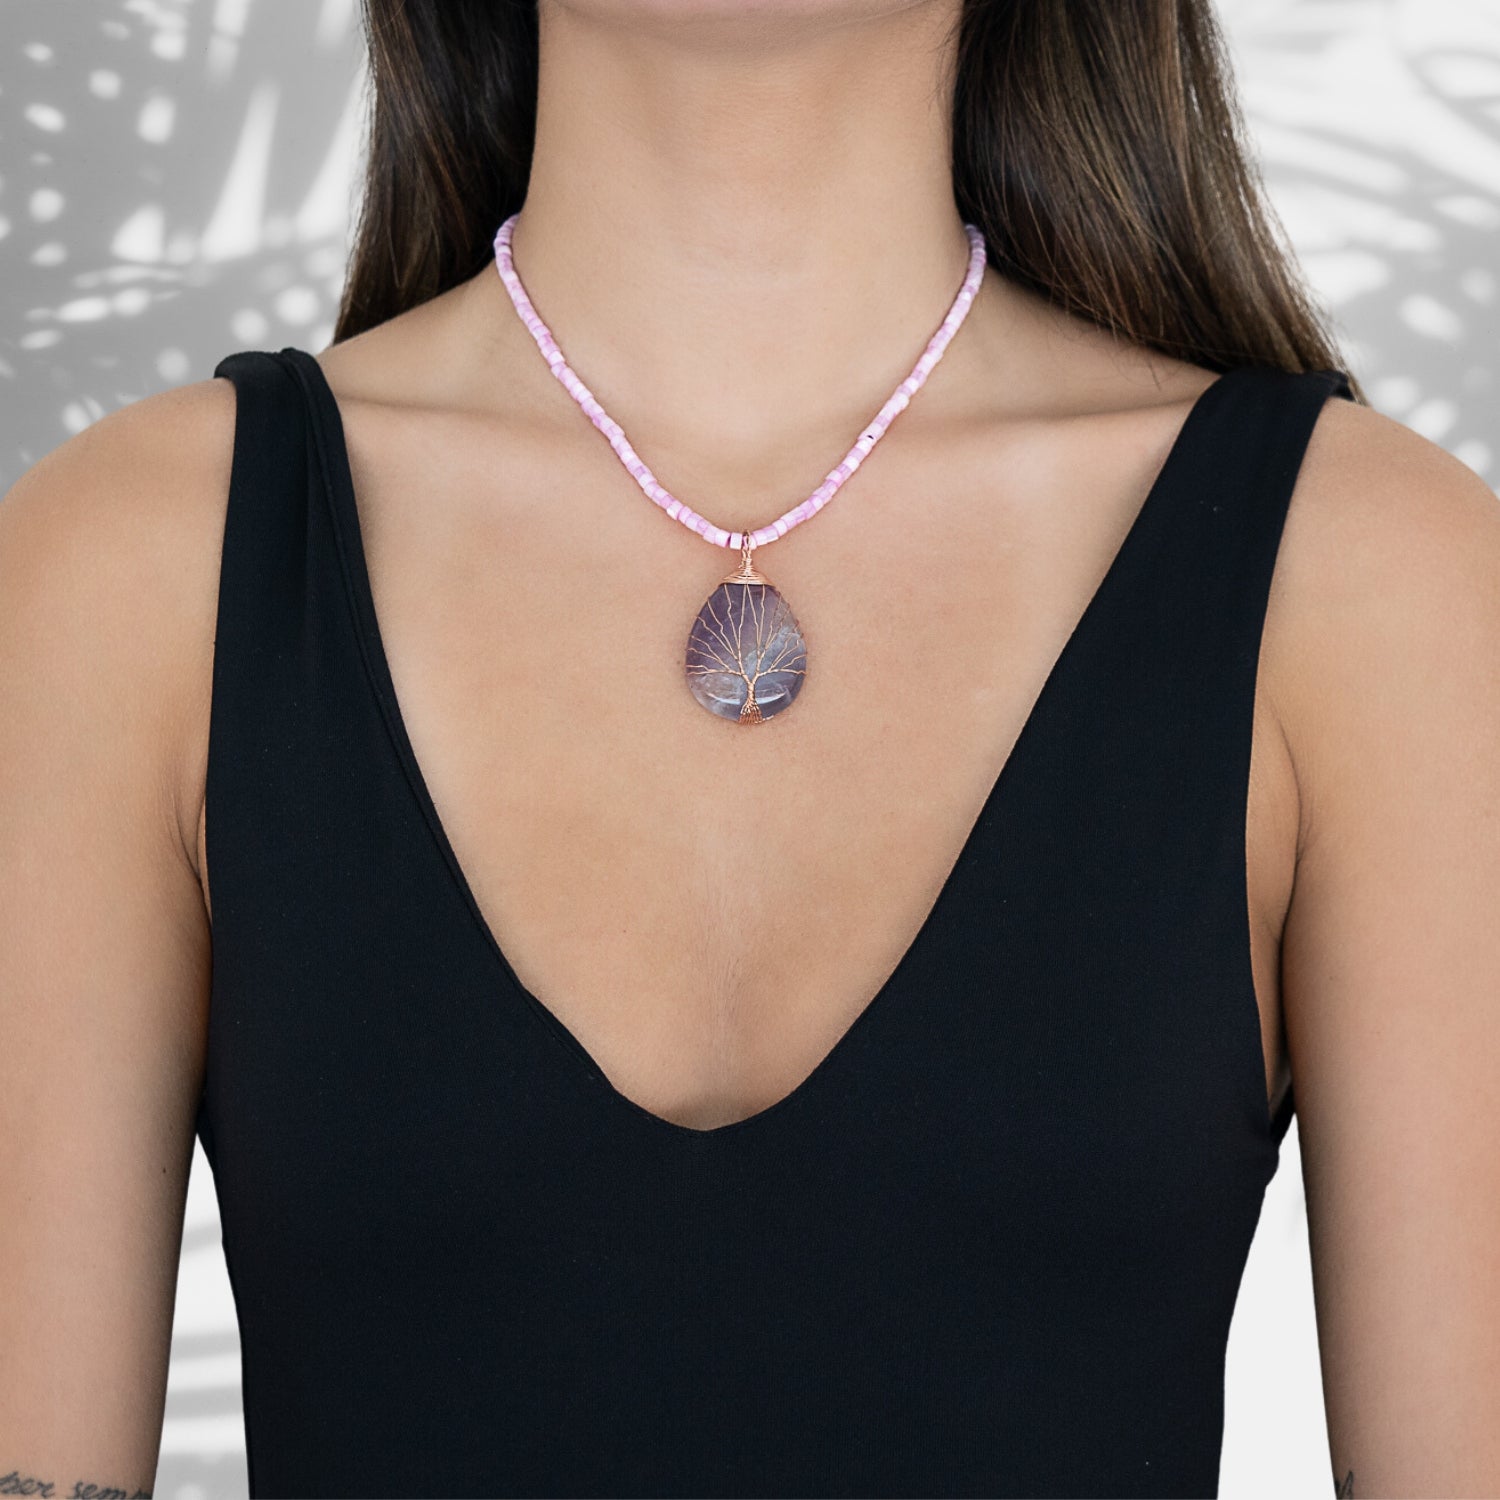 The model exudes grace and style while wearing the Amethyst Healing Tree Necklace, showcasing its elegant design and healing energy.